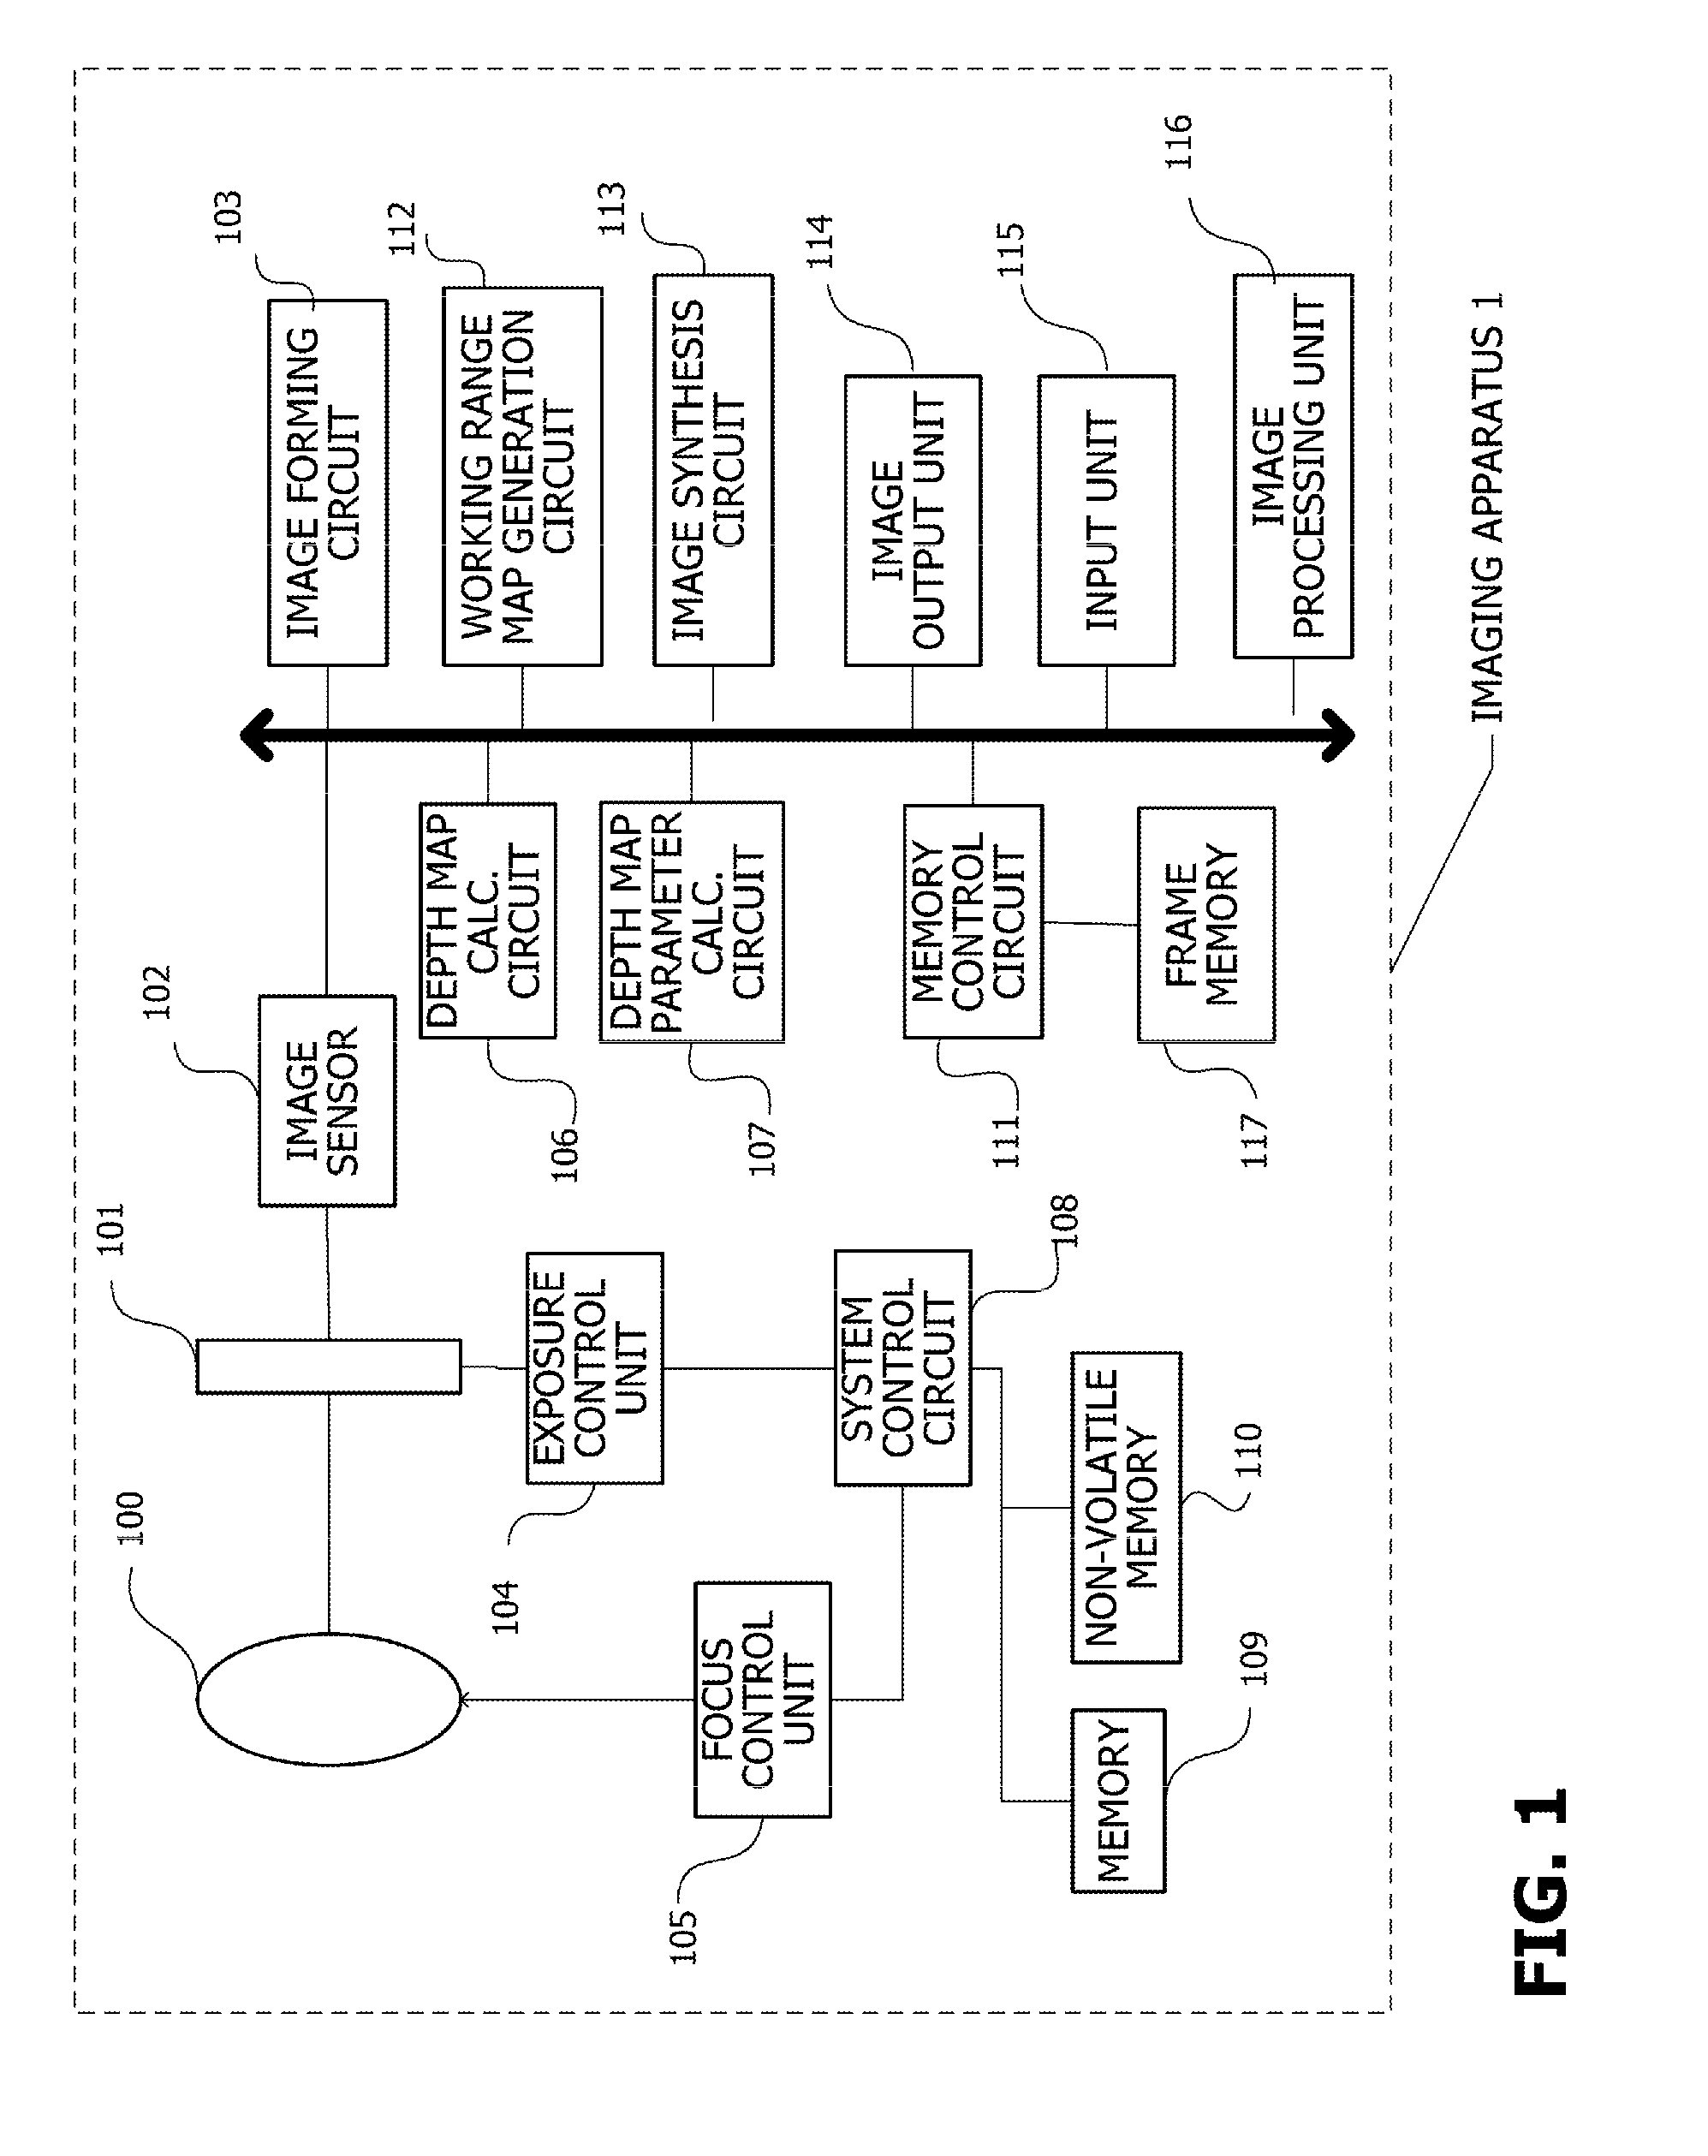 Imaging apparatus and method of controlling same